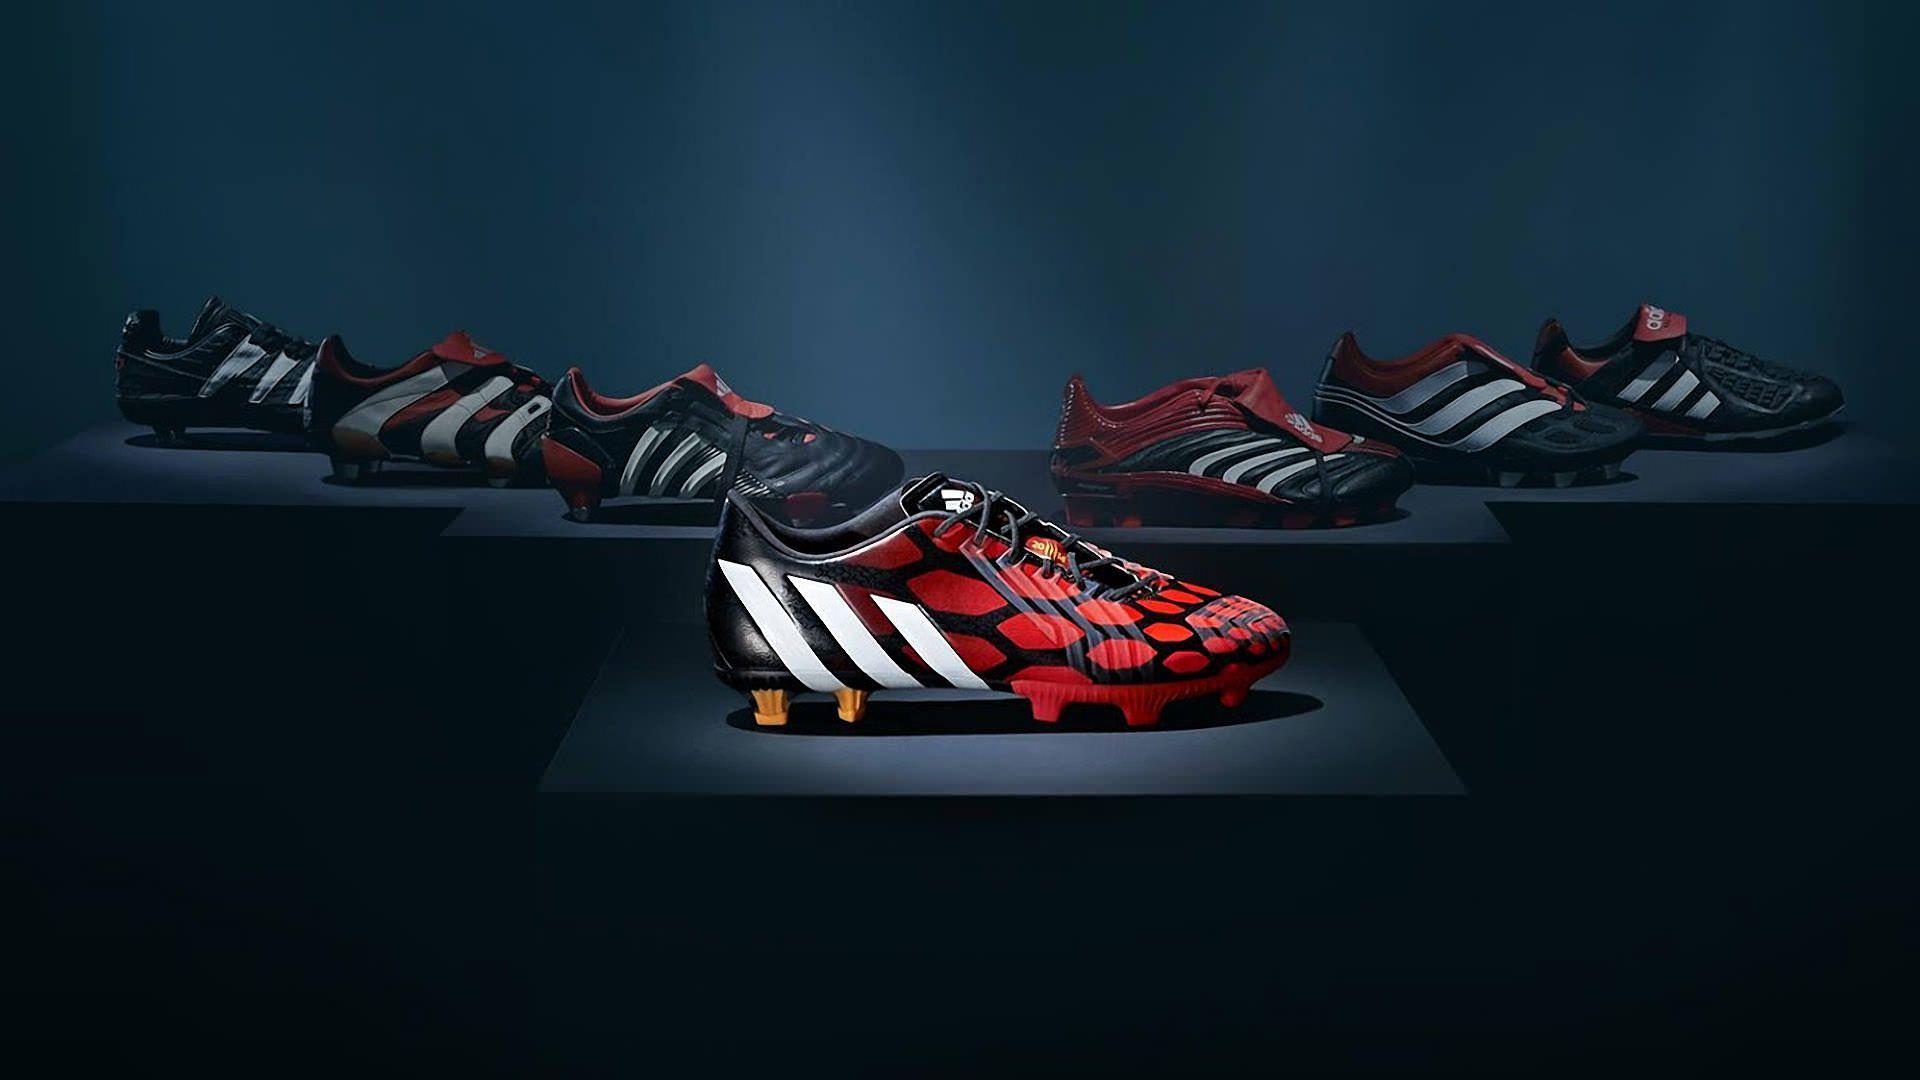 Looking for HD wallpaper of Adidas? here we have gathered a